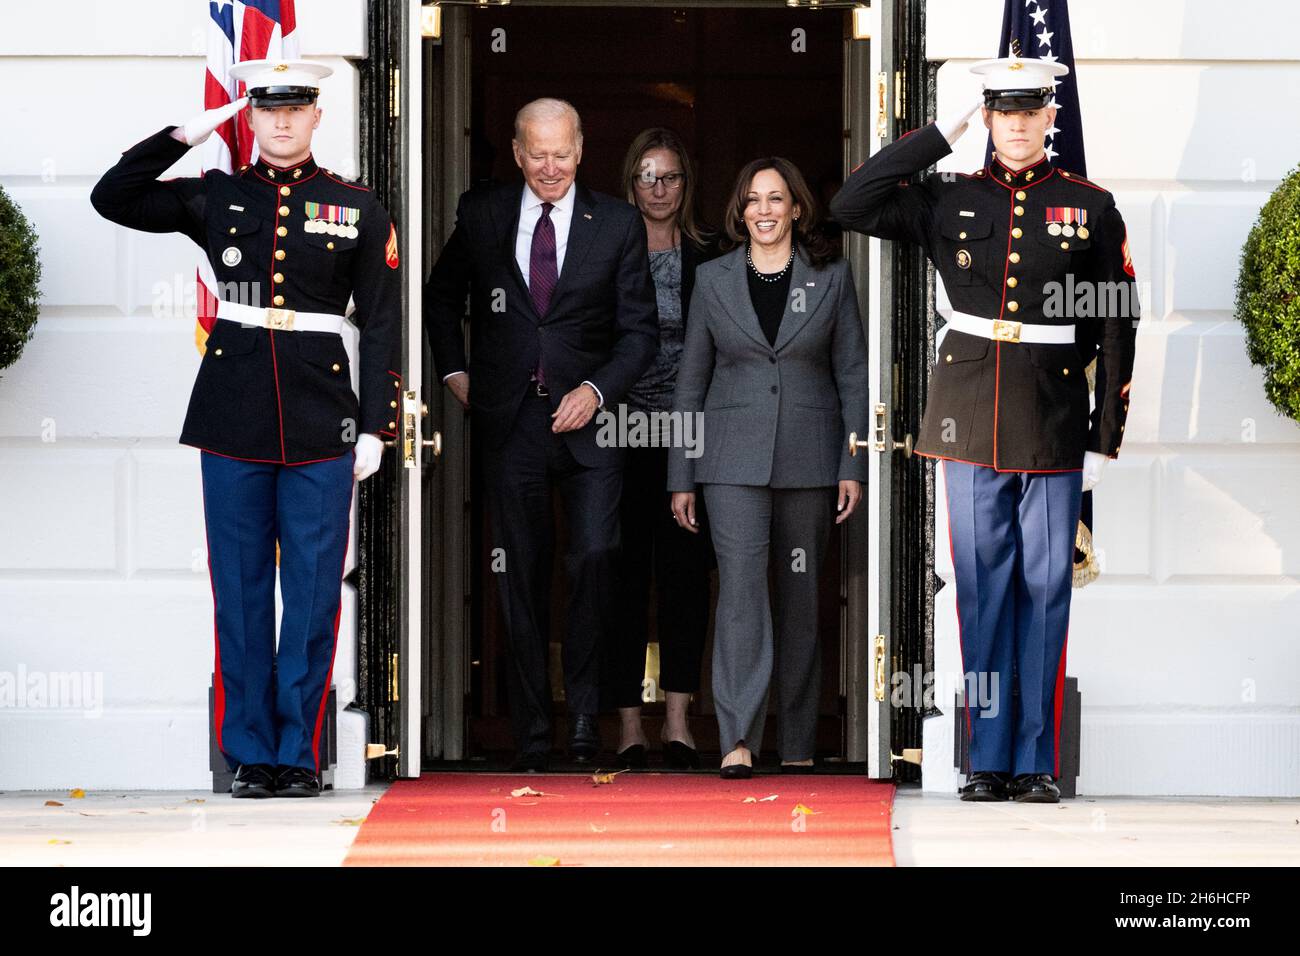 Washington, United States. 15th Nov, 2021. President Joe Biden and Vice President Kamala Harris arrive at a ceremony where the President signed into law the Bipartisan Infrastructure Deal, H.R. 3684, and the “Infrastructure Investment and Jobs Act”. Credit: SOPA Images Limited/Alamy Live News Stock Photo